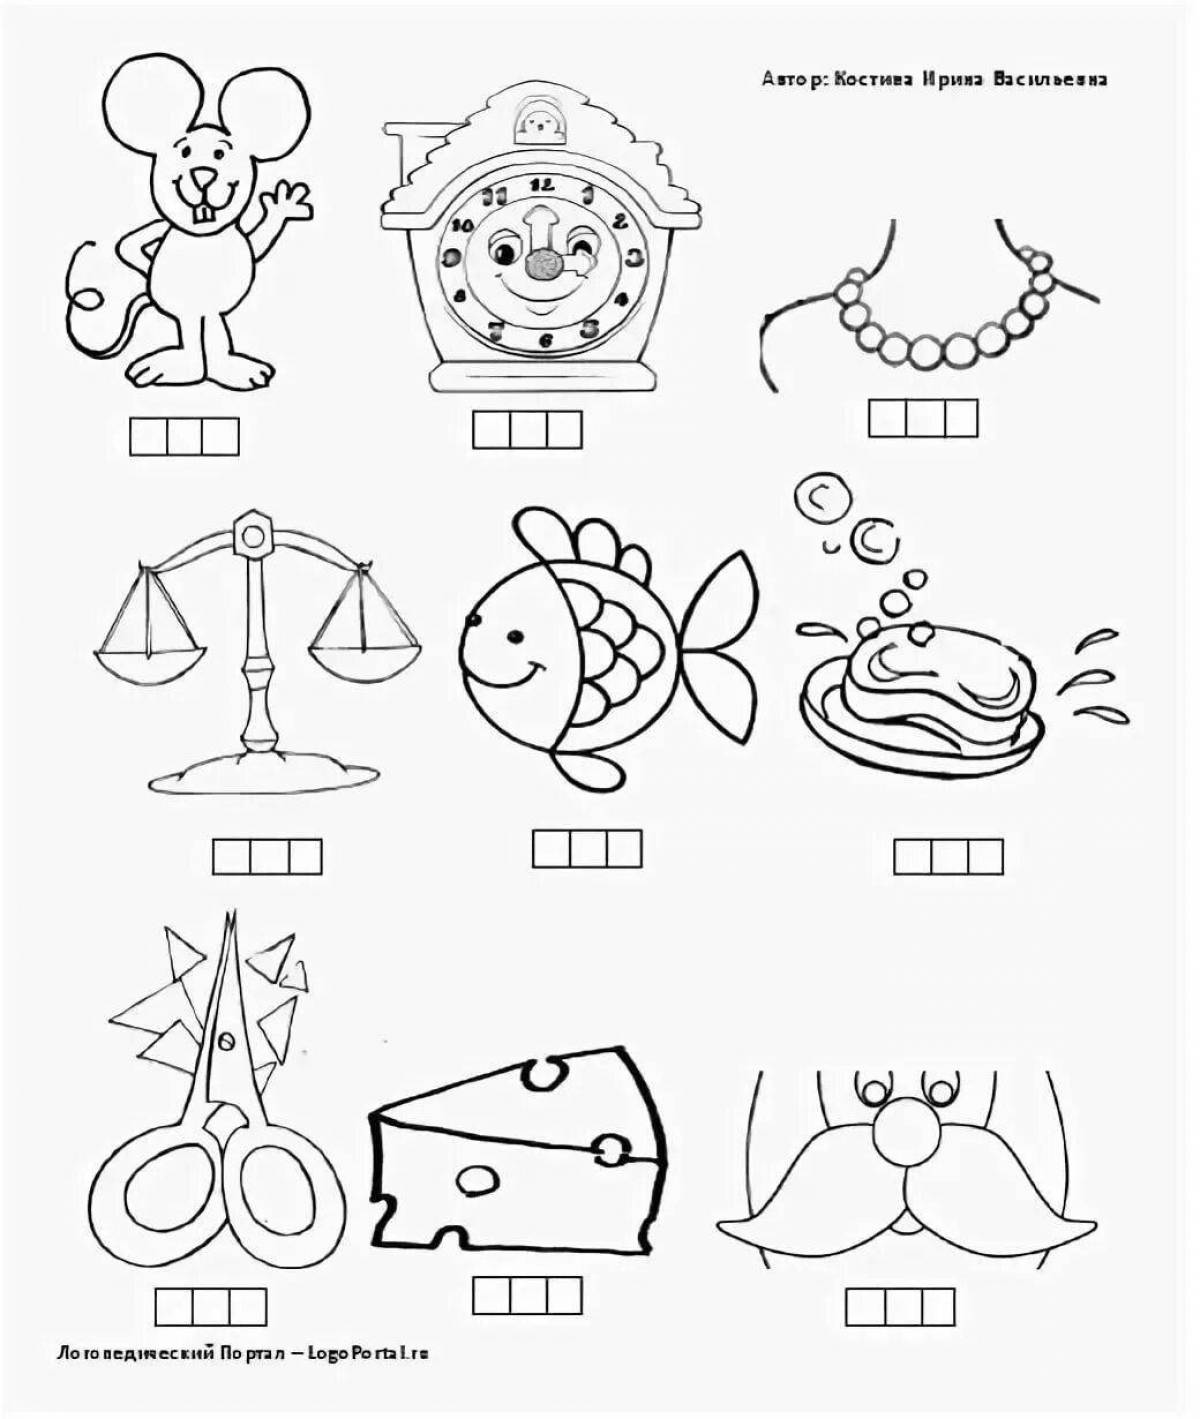 Fun coloring page for sounds and letters